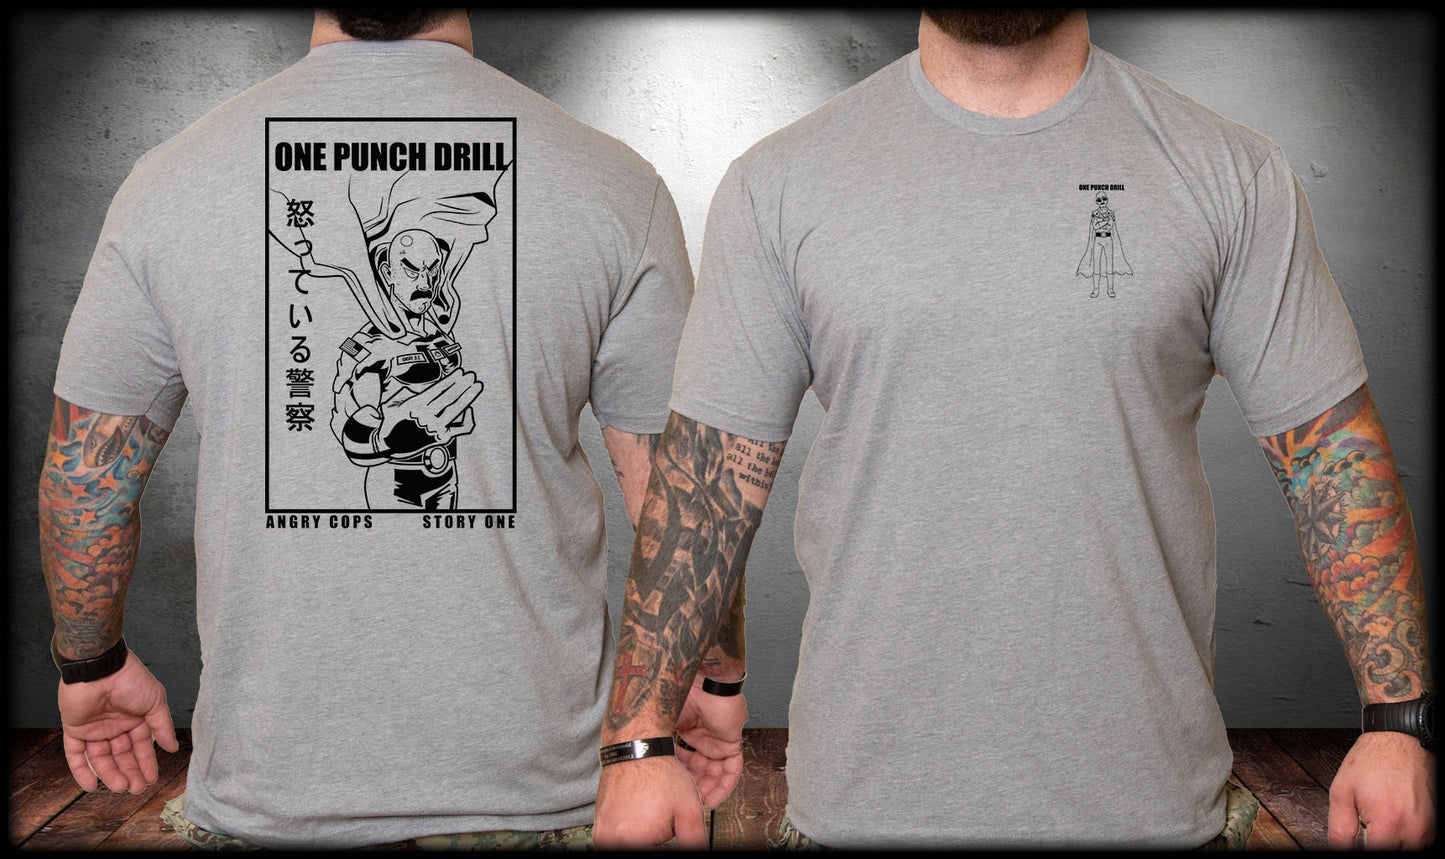 One Punch Drill